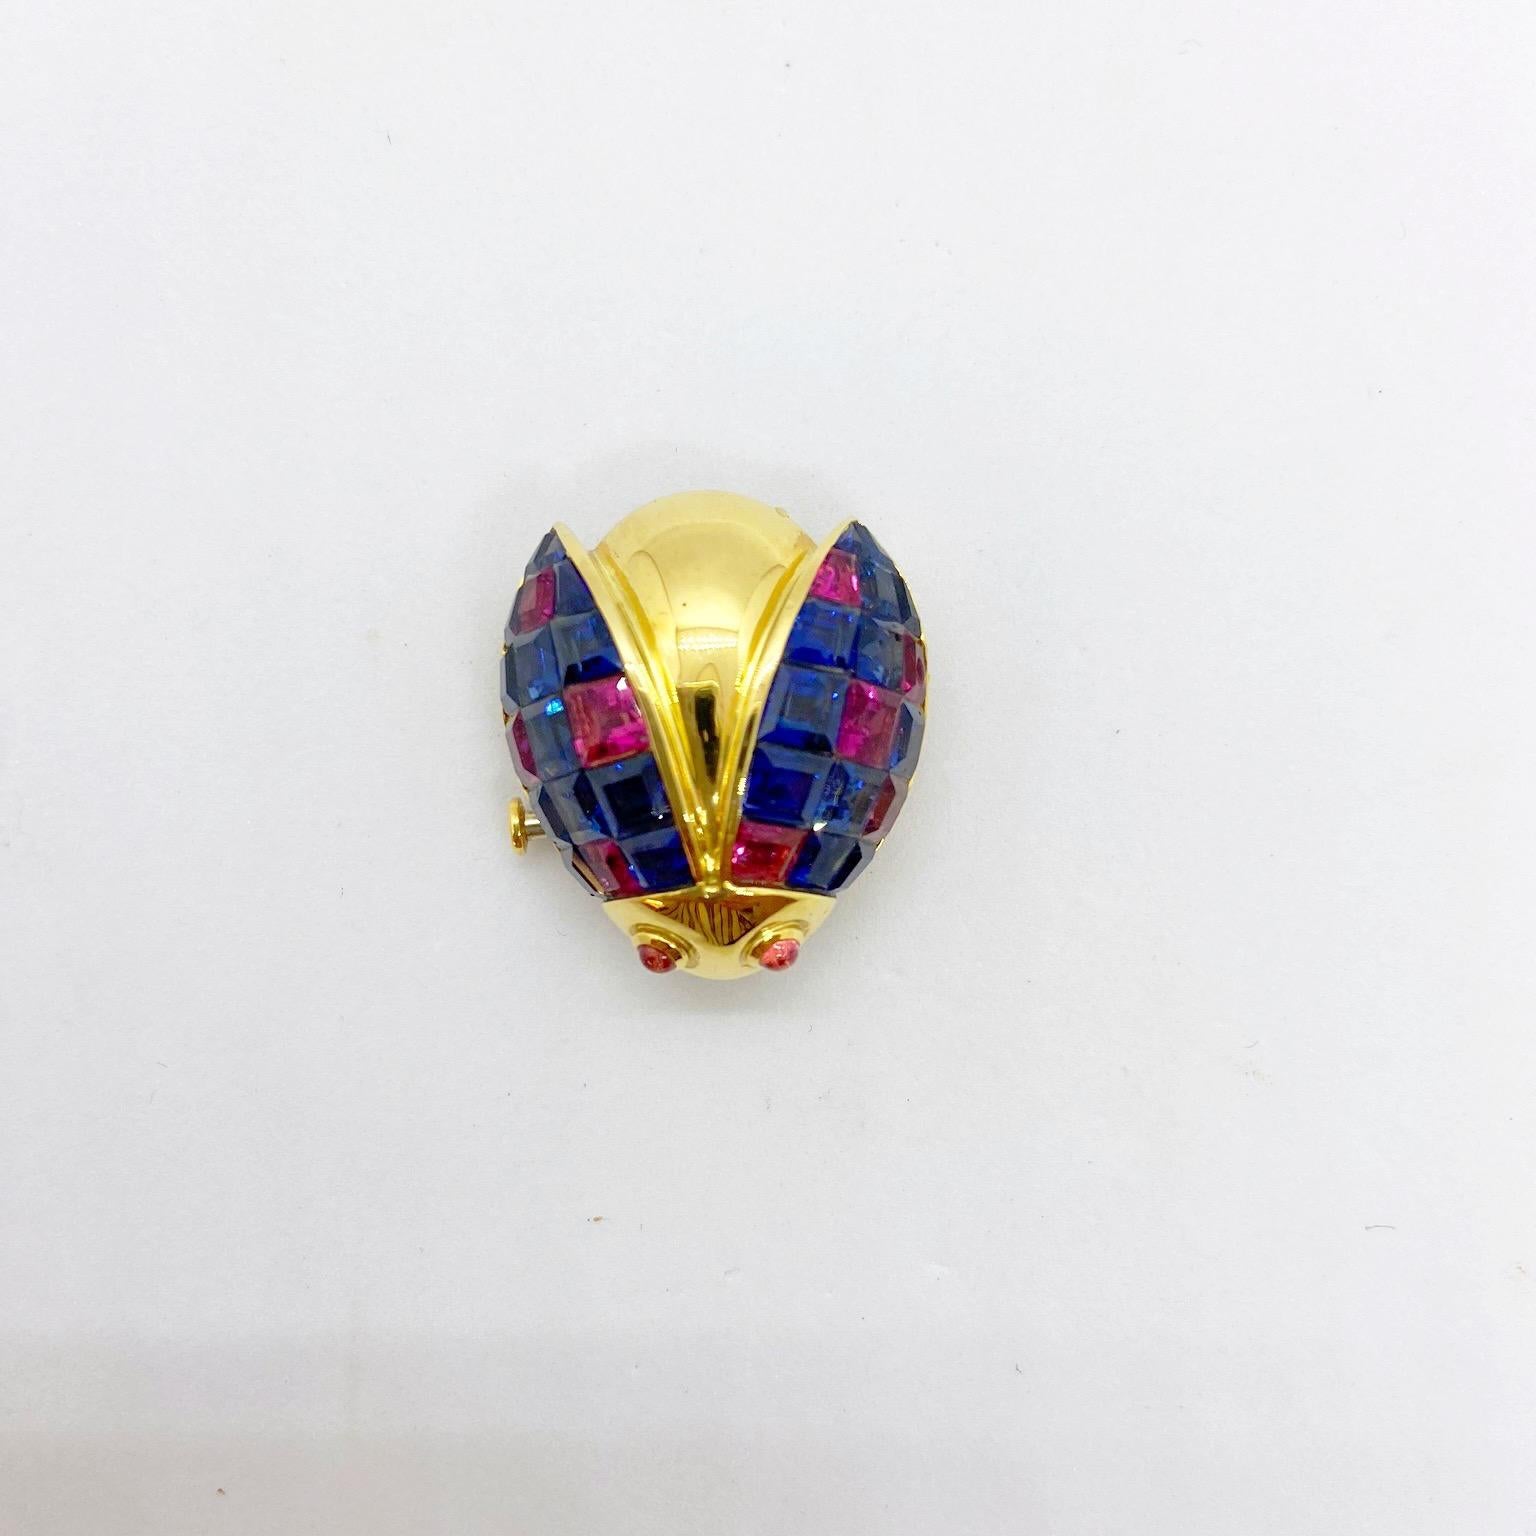 Sabbadini 18 Karat Gold Ladybug Brooch with 8.56 Carat Blue and Pink Sapphires In New Condition For Sale In New York, NY